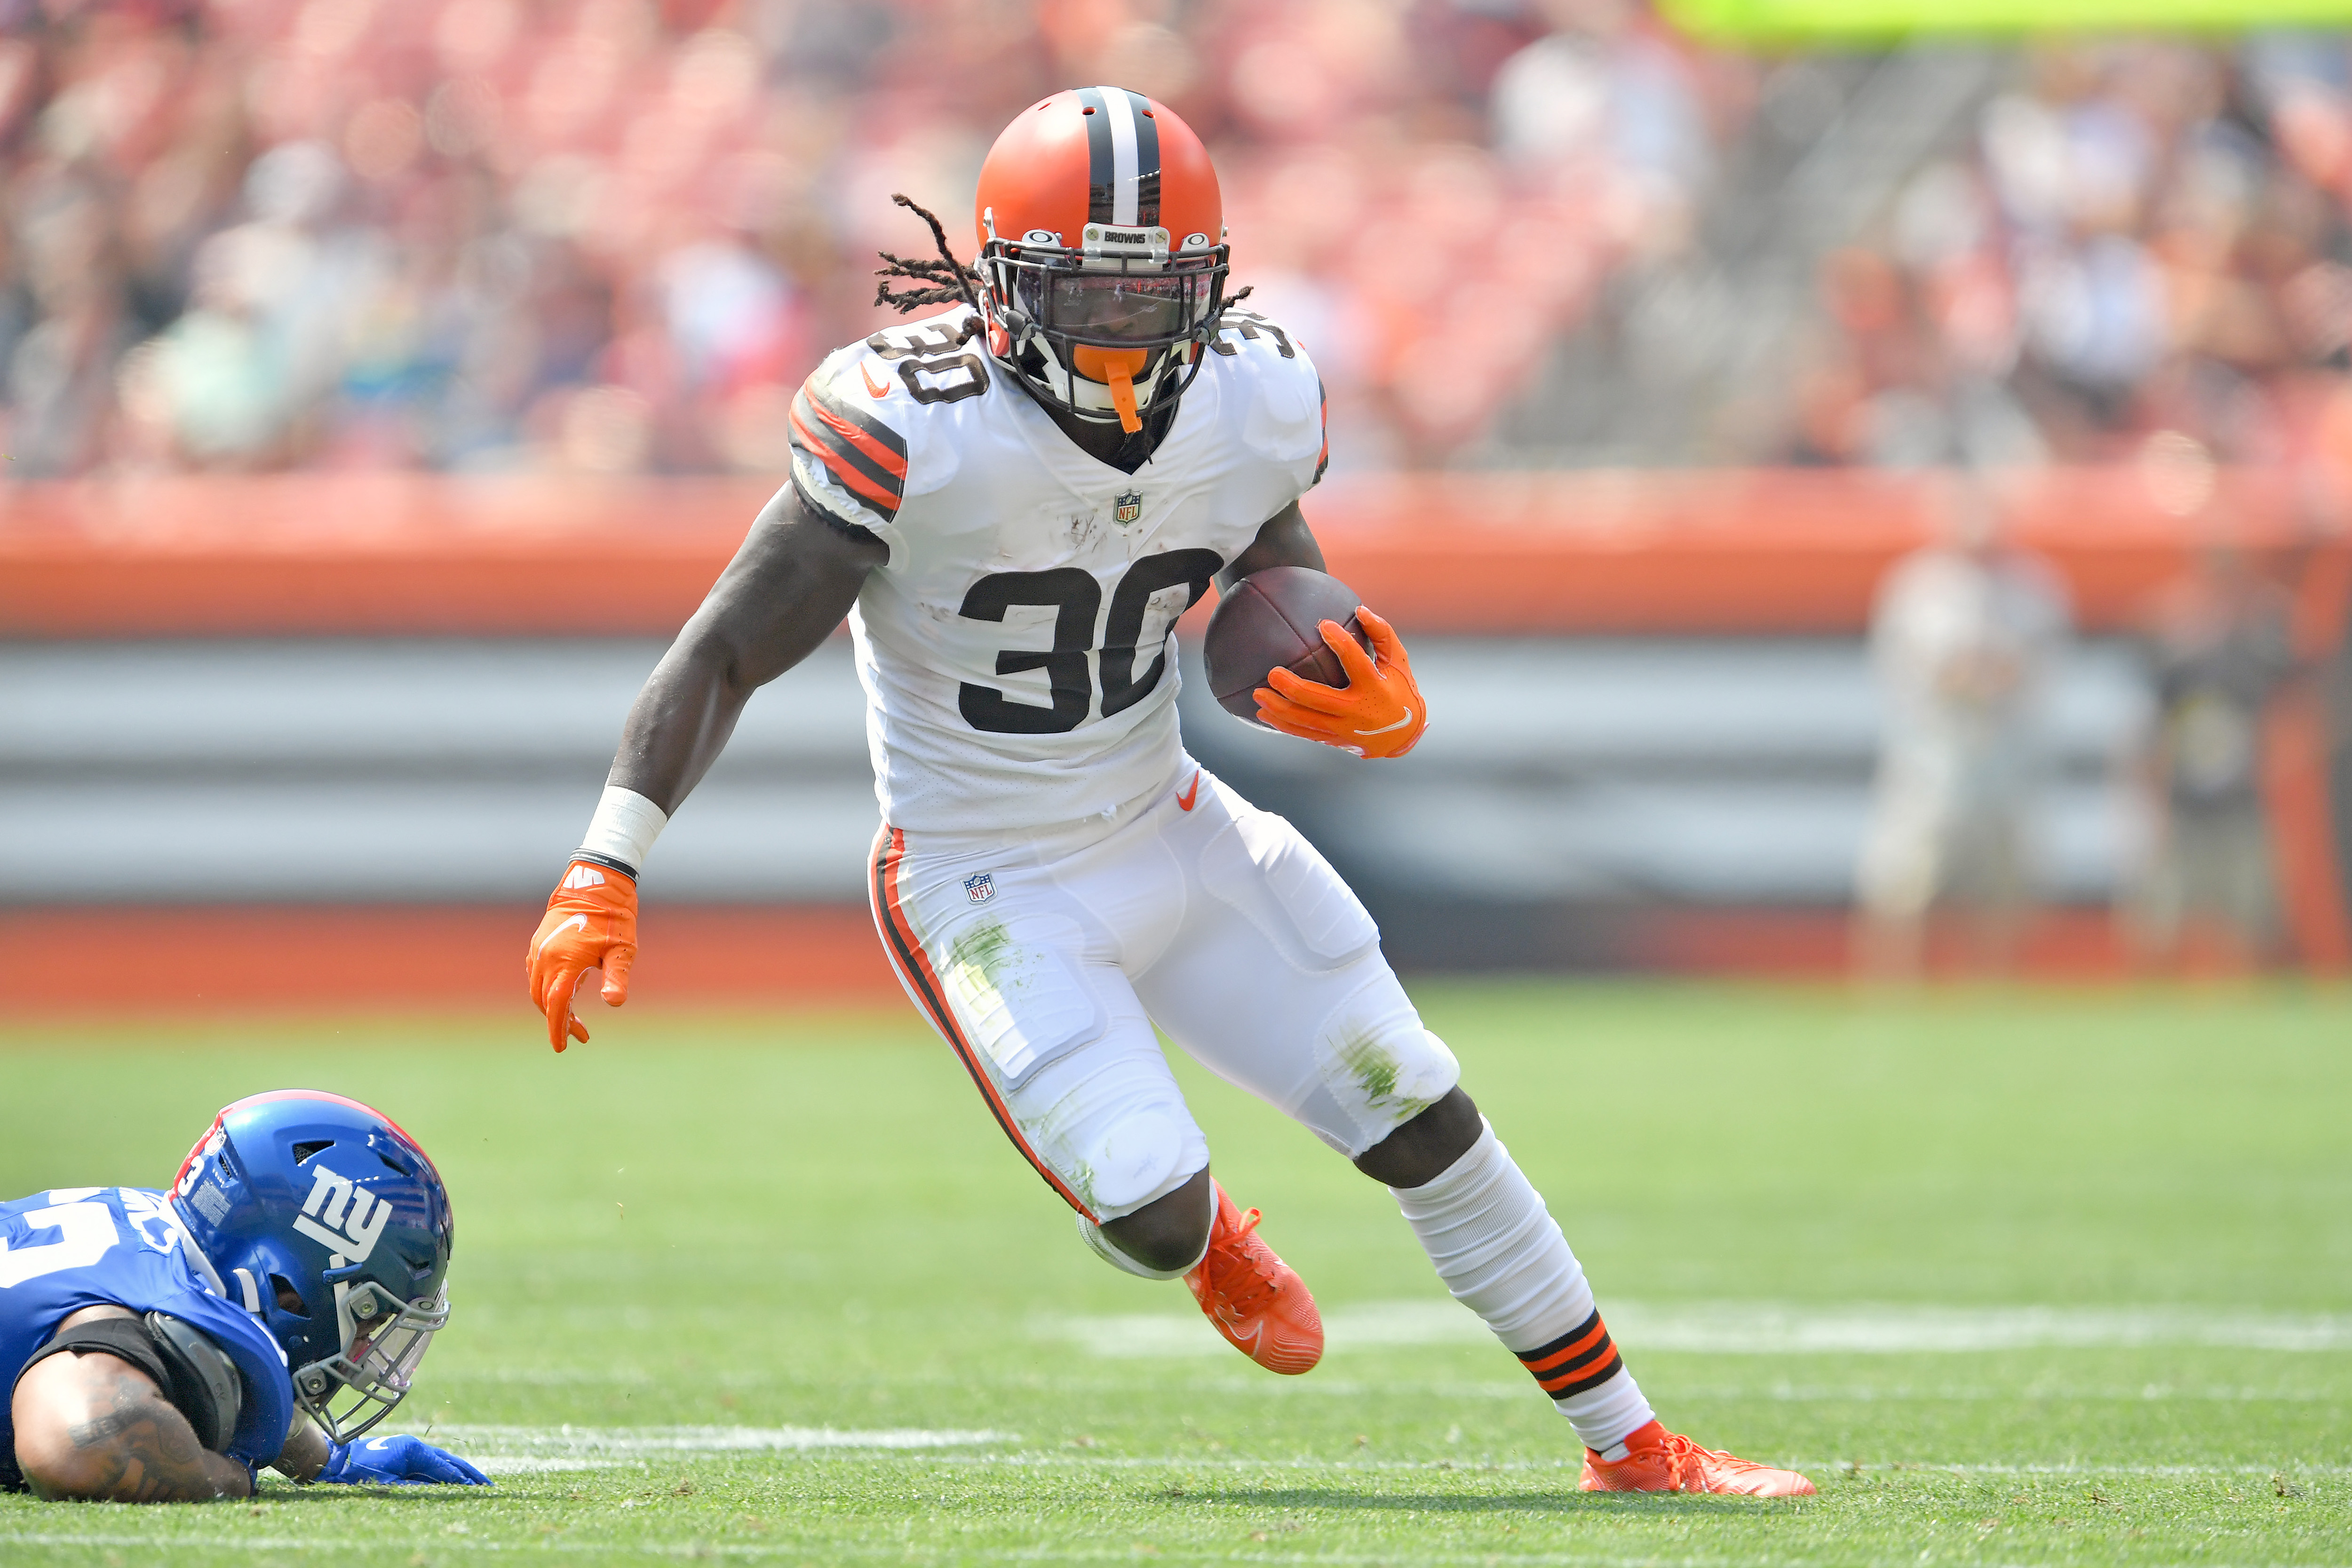 Browns running back D'Ernest Johnson in actions against the Giants